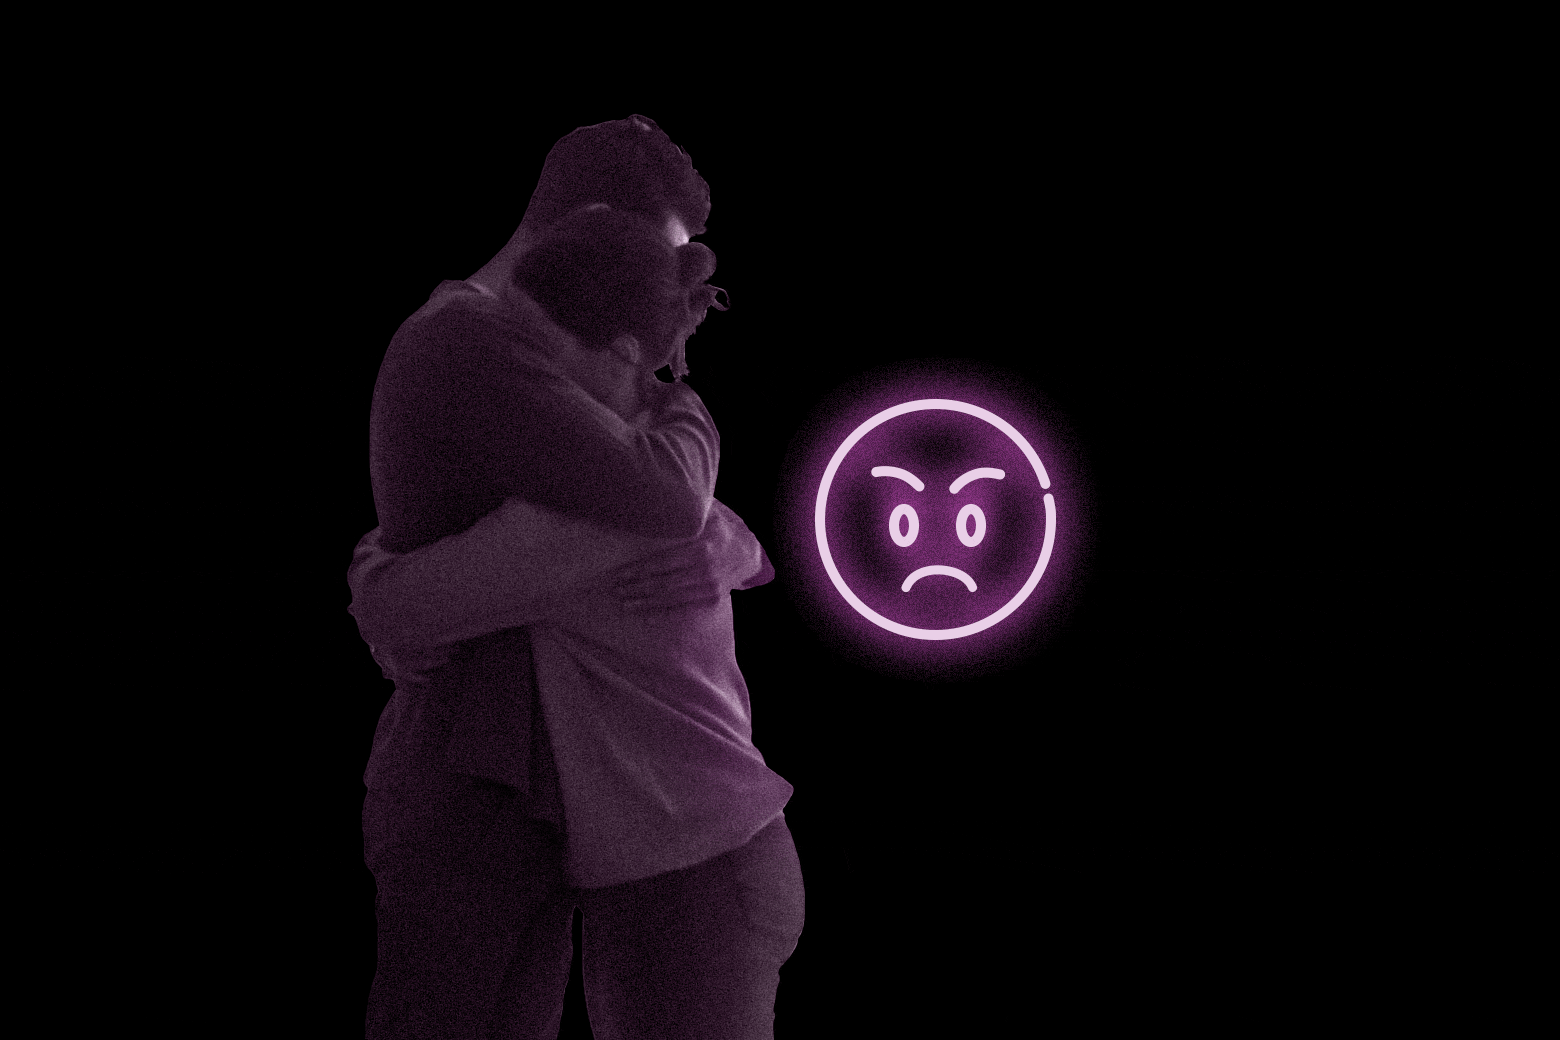 A man and woman hugging each other with a floating shocked and angry emoji next to them.